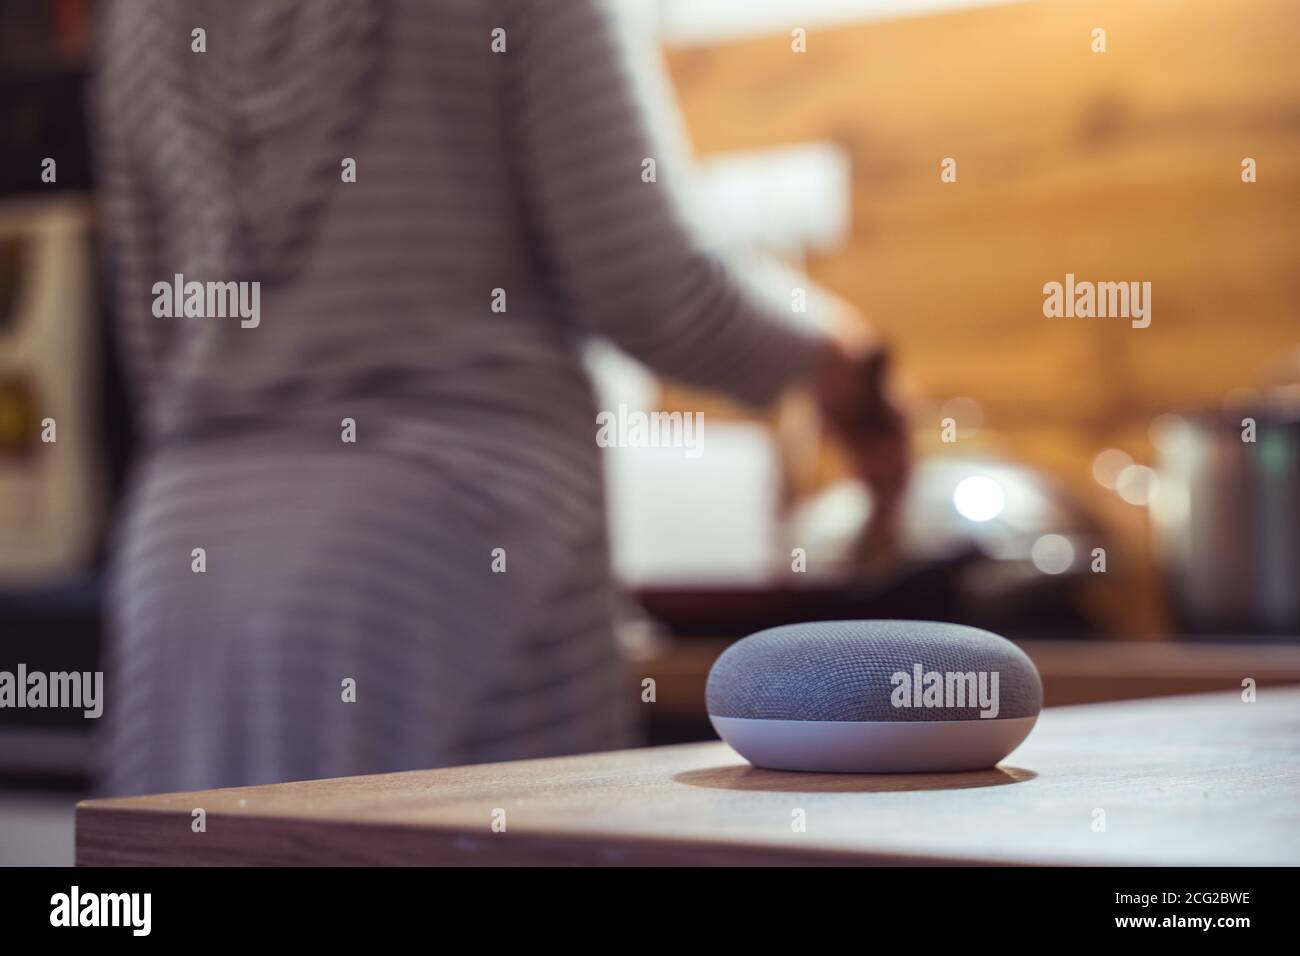 voice controlled smart speaker in a interior home voice controlled smart speaker in a interior home environment with a woman cooking in the background Stock Photo